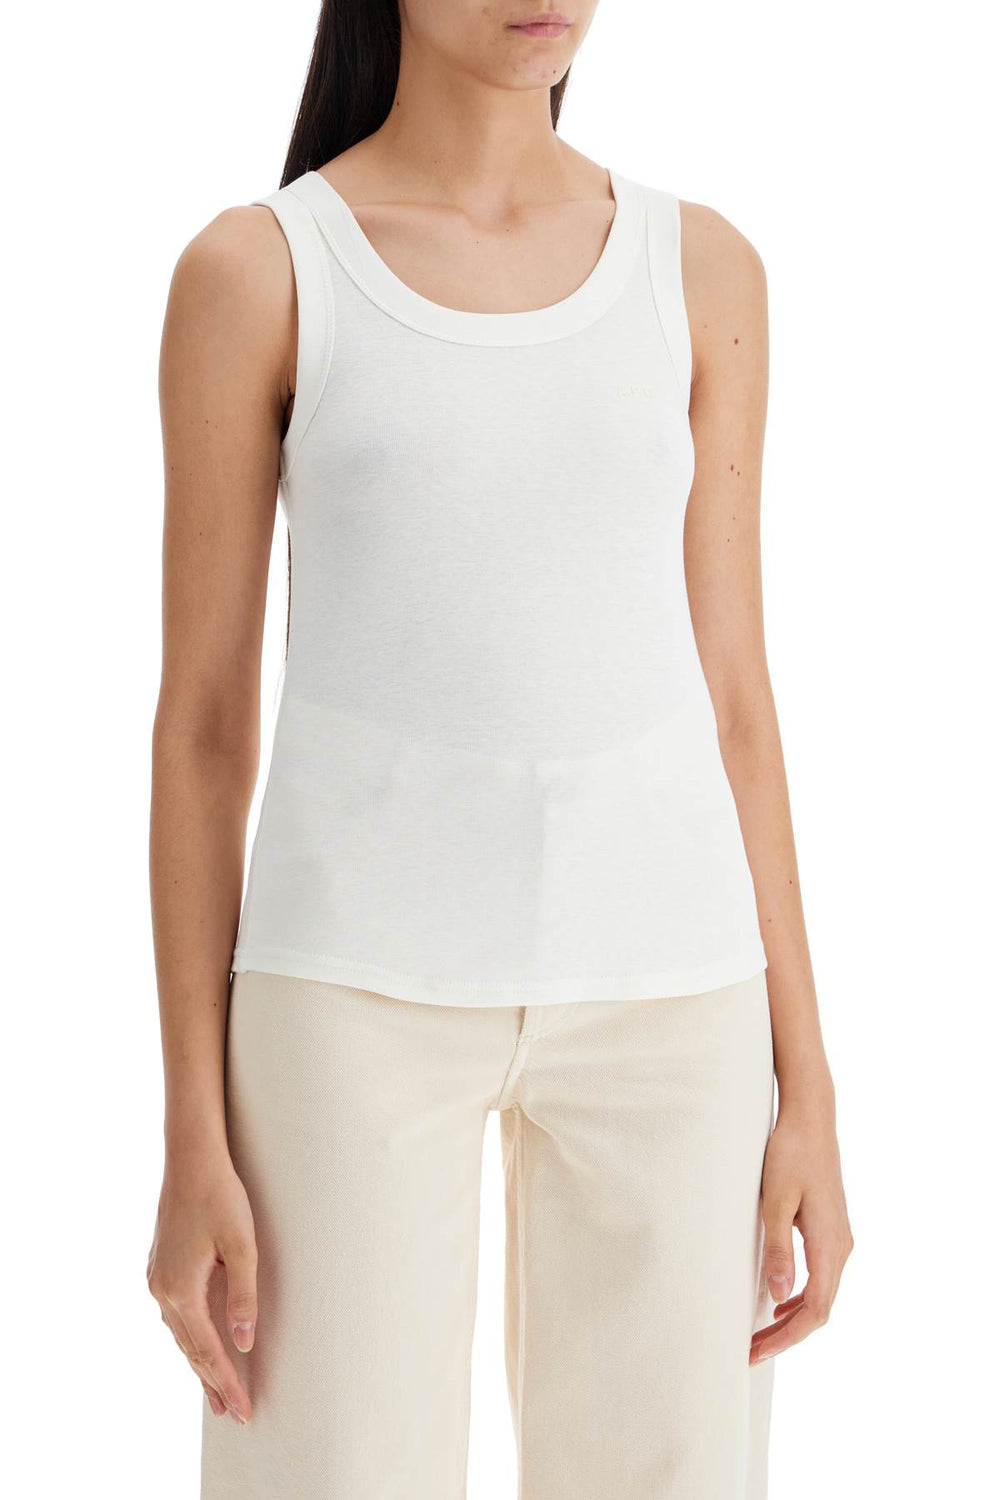 agathe tank top for-1